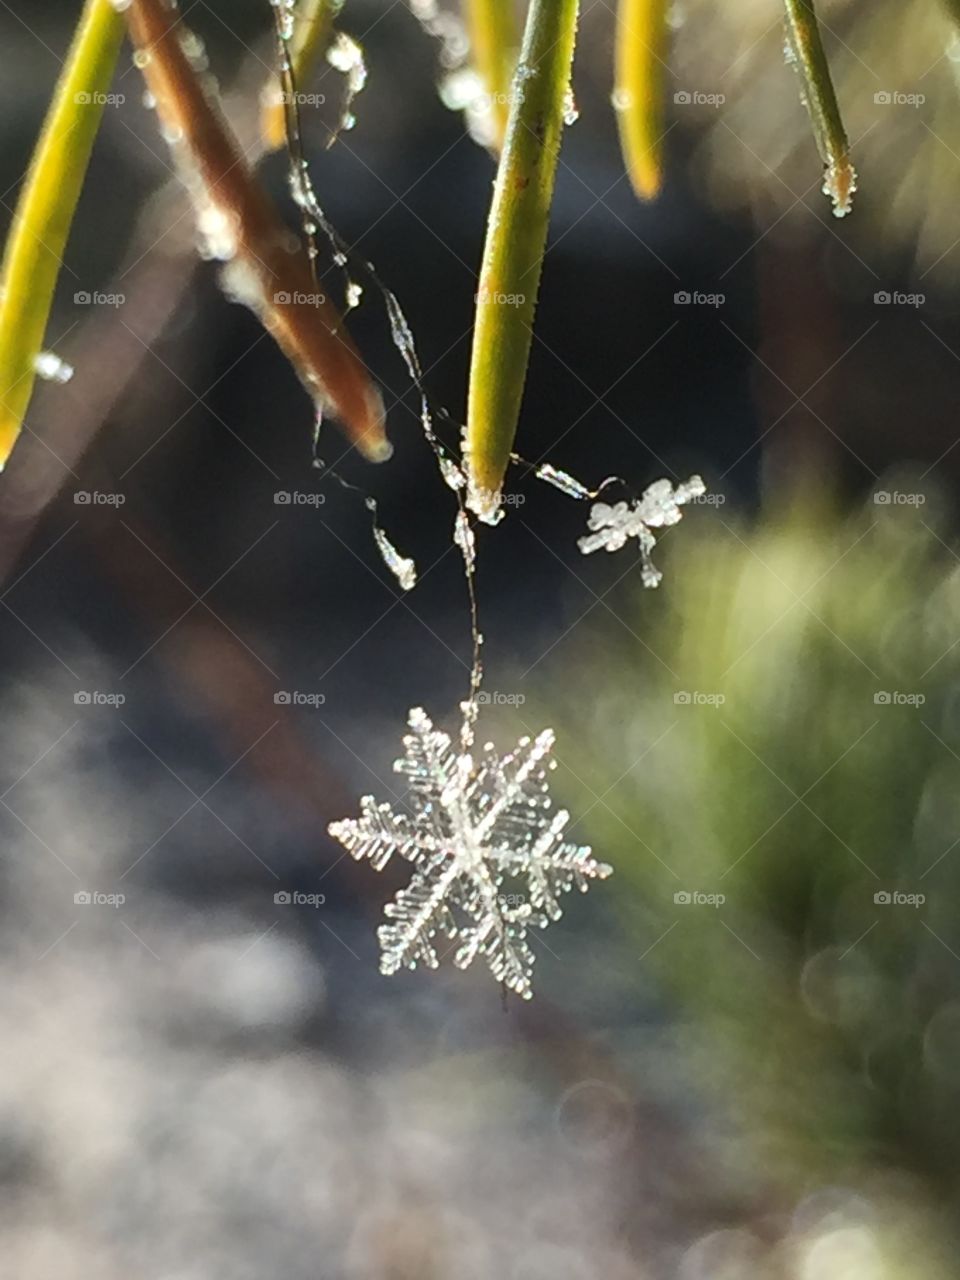 First snowflake of the year, caught in the sunlight. Symmetry & balance, nature & cycle of life. 